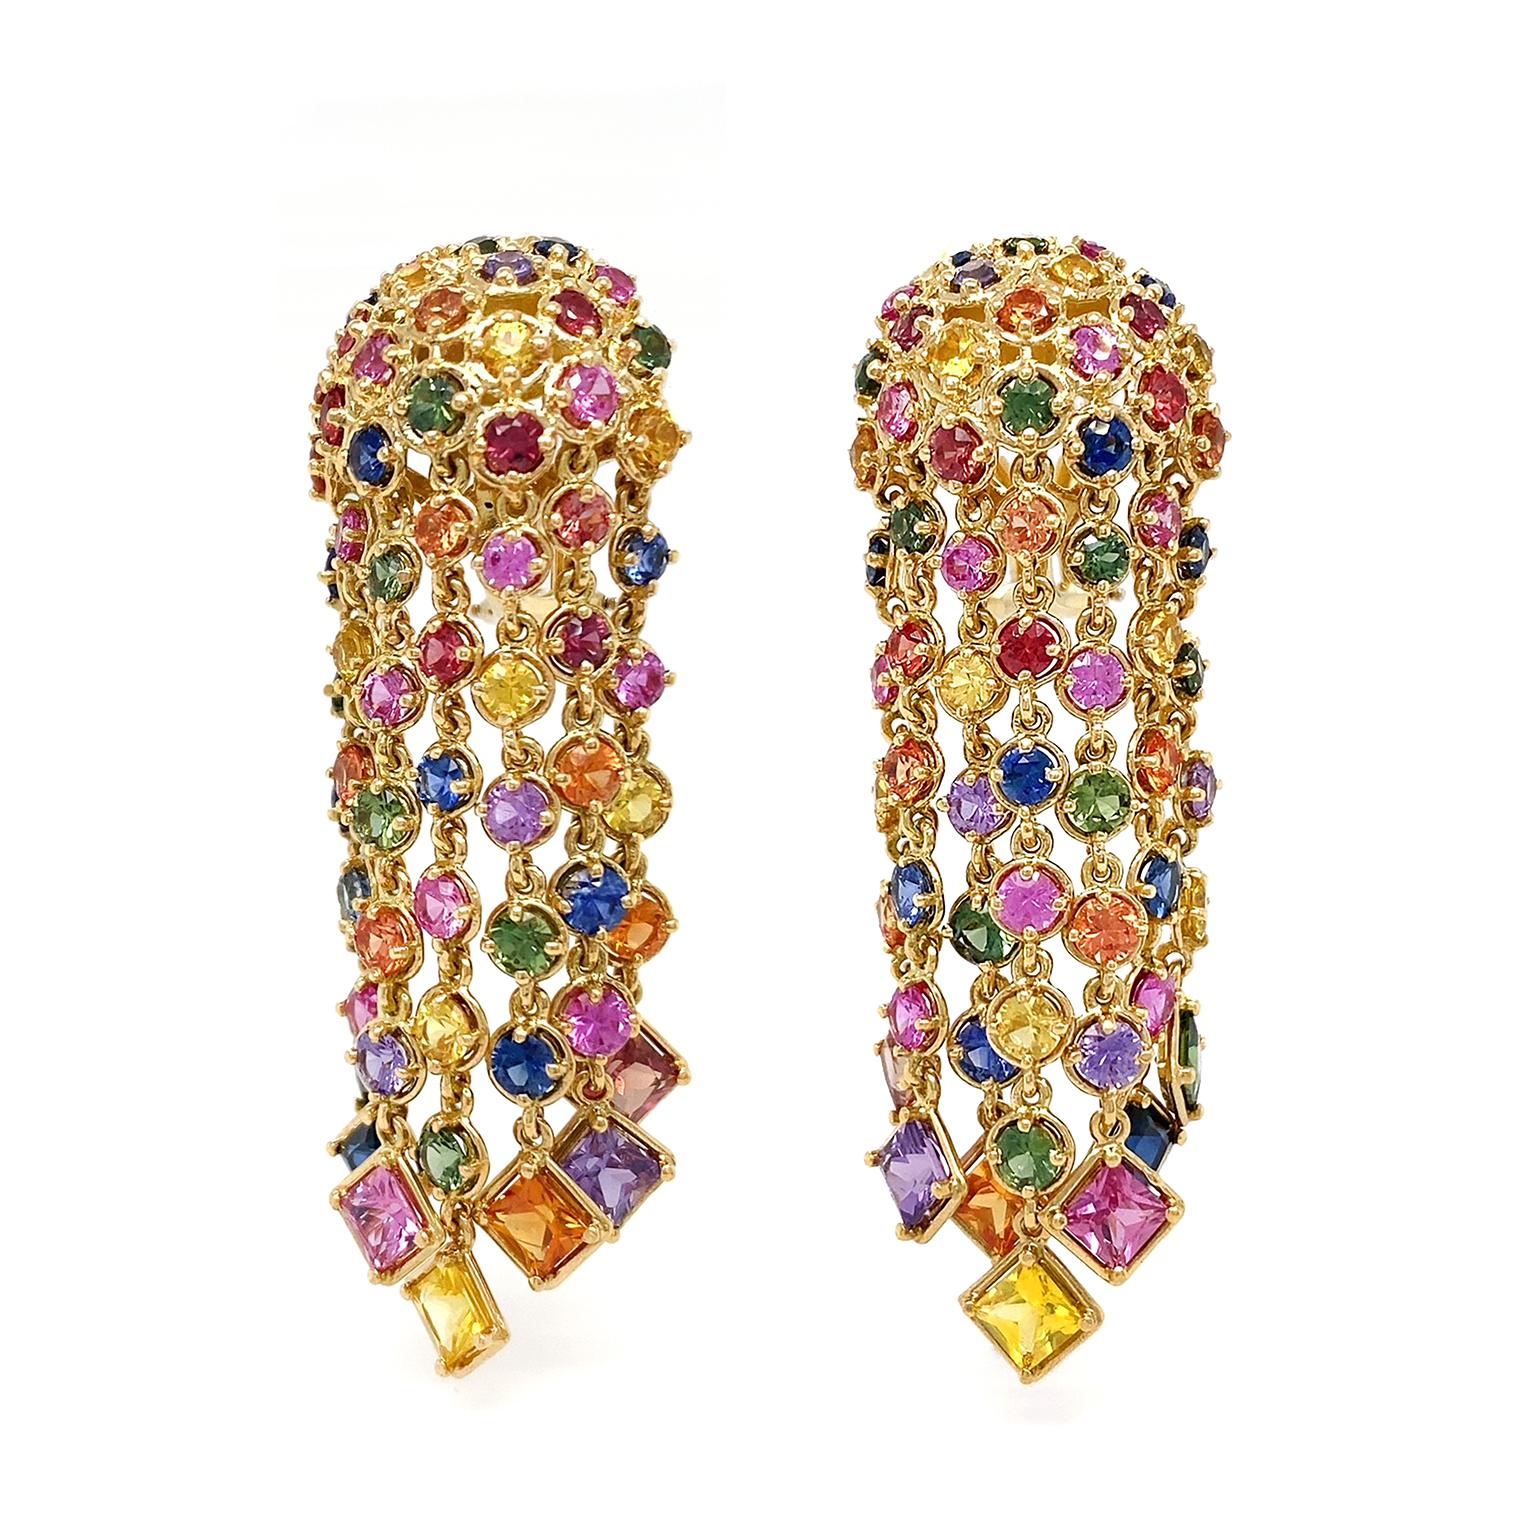 Sapphires of many colors glitter while set in 18k yellow gold for these drop earrings. Round and princess cuts of sapphires, one of the most prized gemstones, totaling 9.78 carats, are displayed. The design starts with an 18k yellow gold bezel set